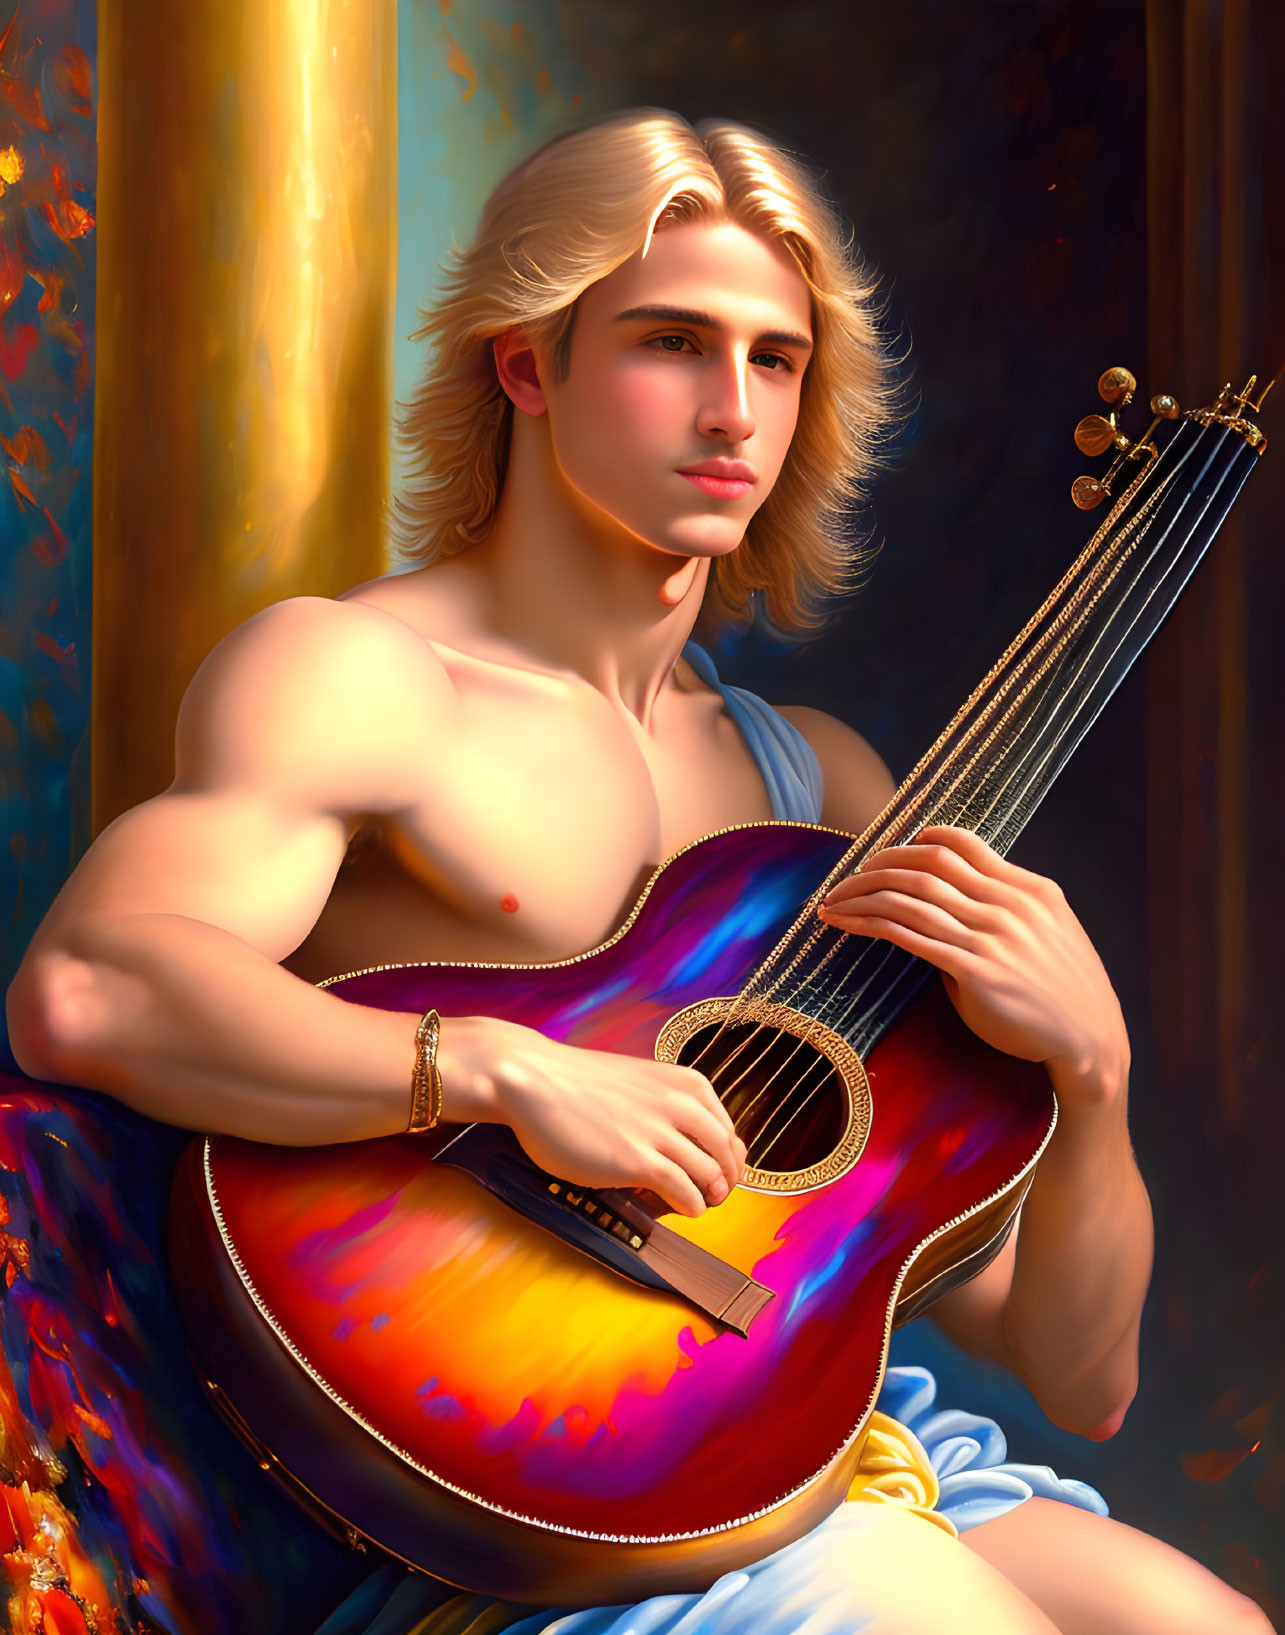 Muscular Blond Man with Colorful Guitar in Blue Cloth Setting